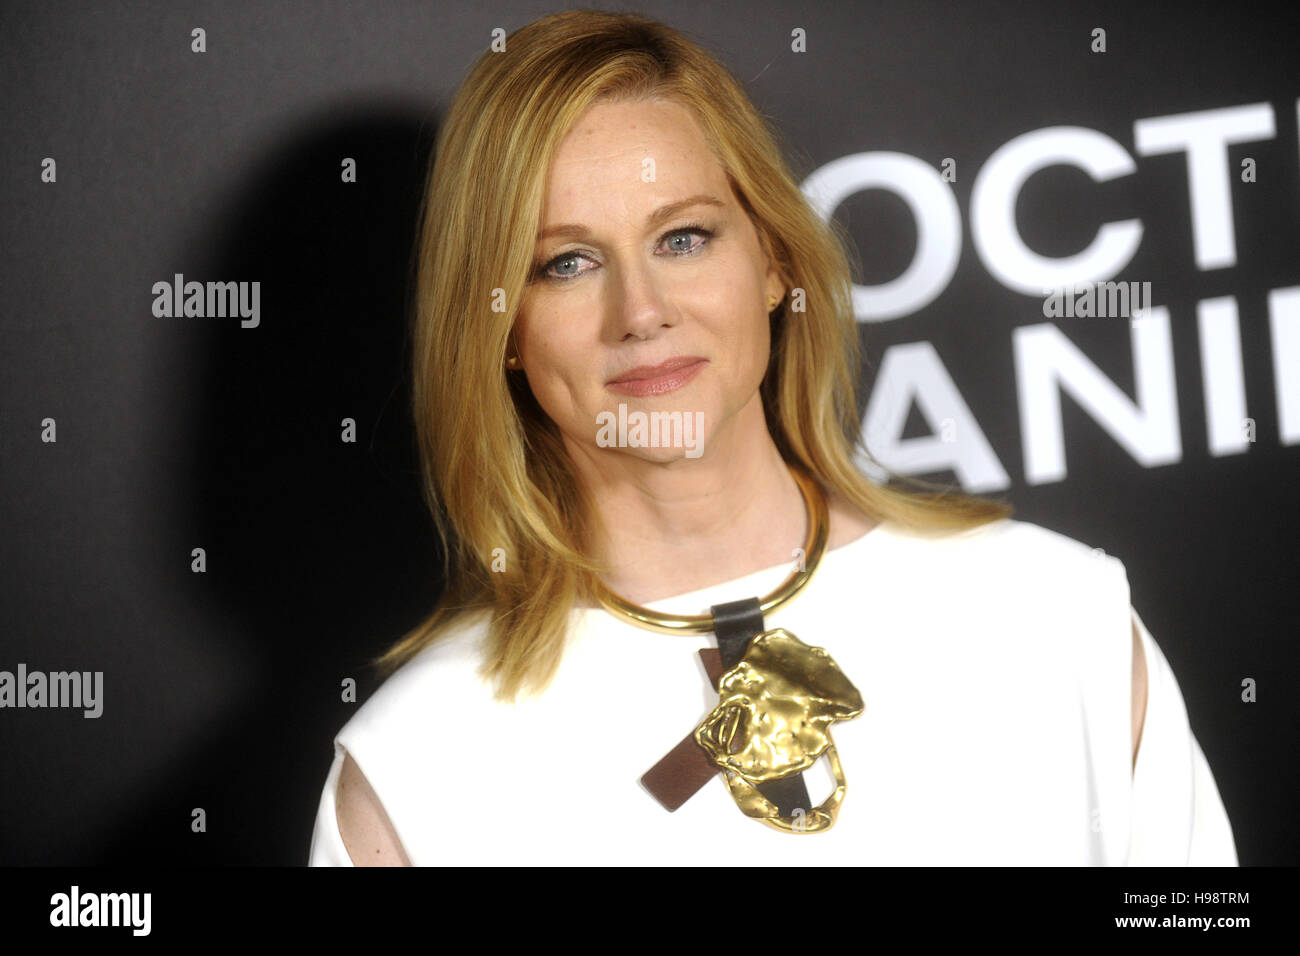 Laura Linney attends the premiere of 